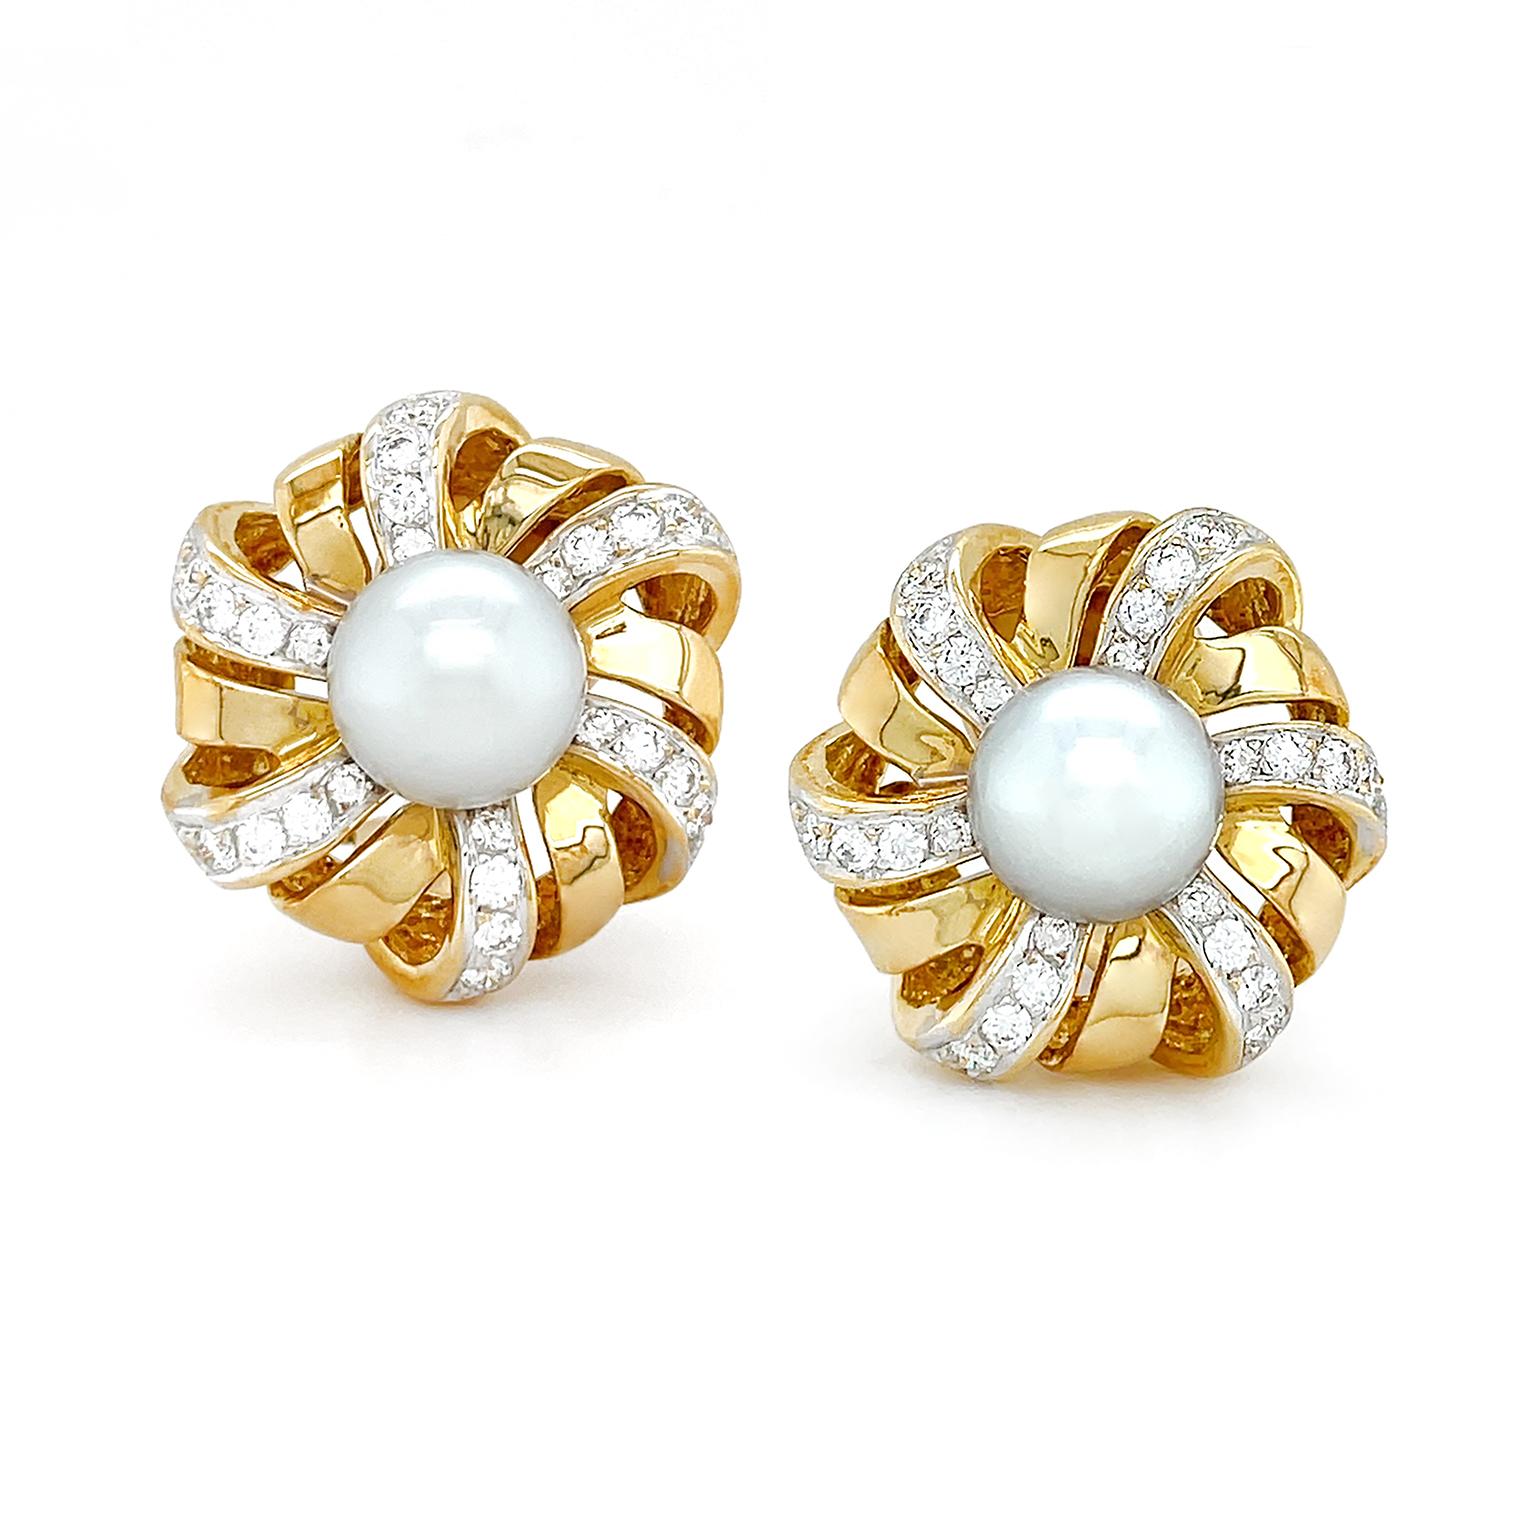 White pearls are the heart of this motif. Rotating around the pearl, 18k yellow gold ribbons create an openwork hexagon. Every other ribbon is pave set with diamonds for a glistening accent, totaling 1.33 carats. The clip-back earrings measure 0.92